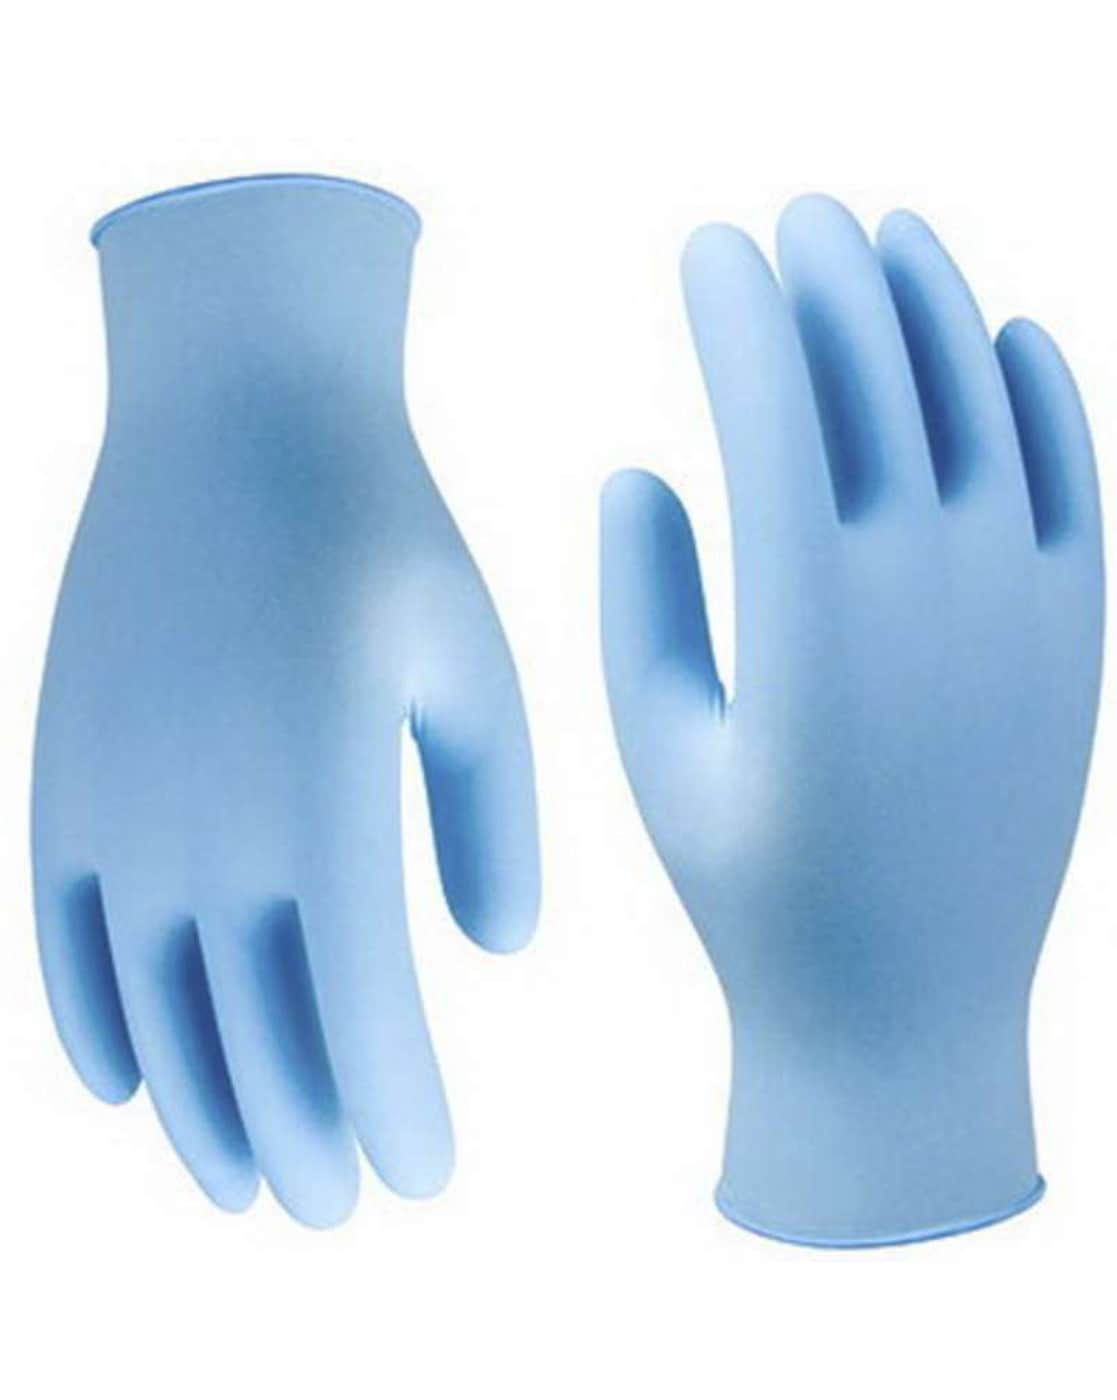 sun protection gloves online